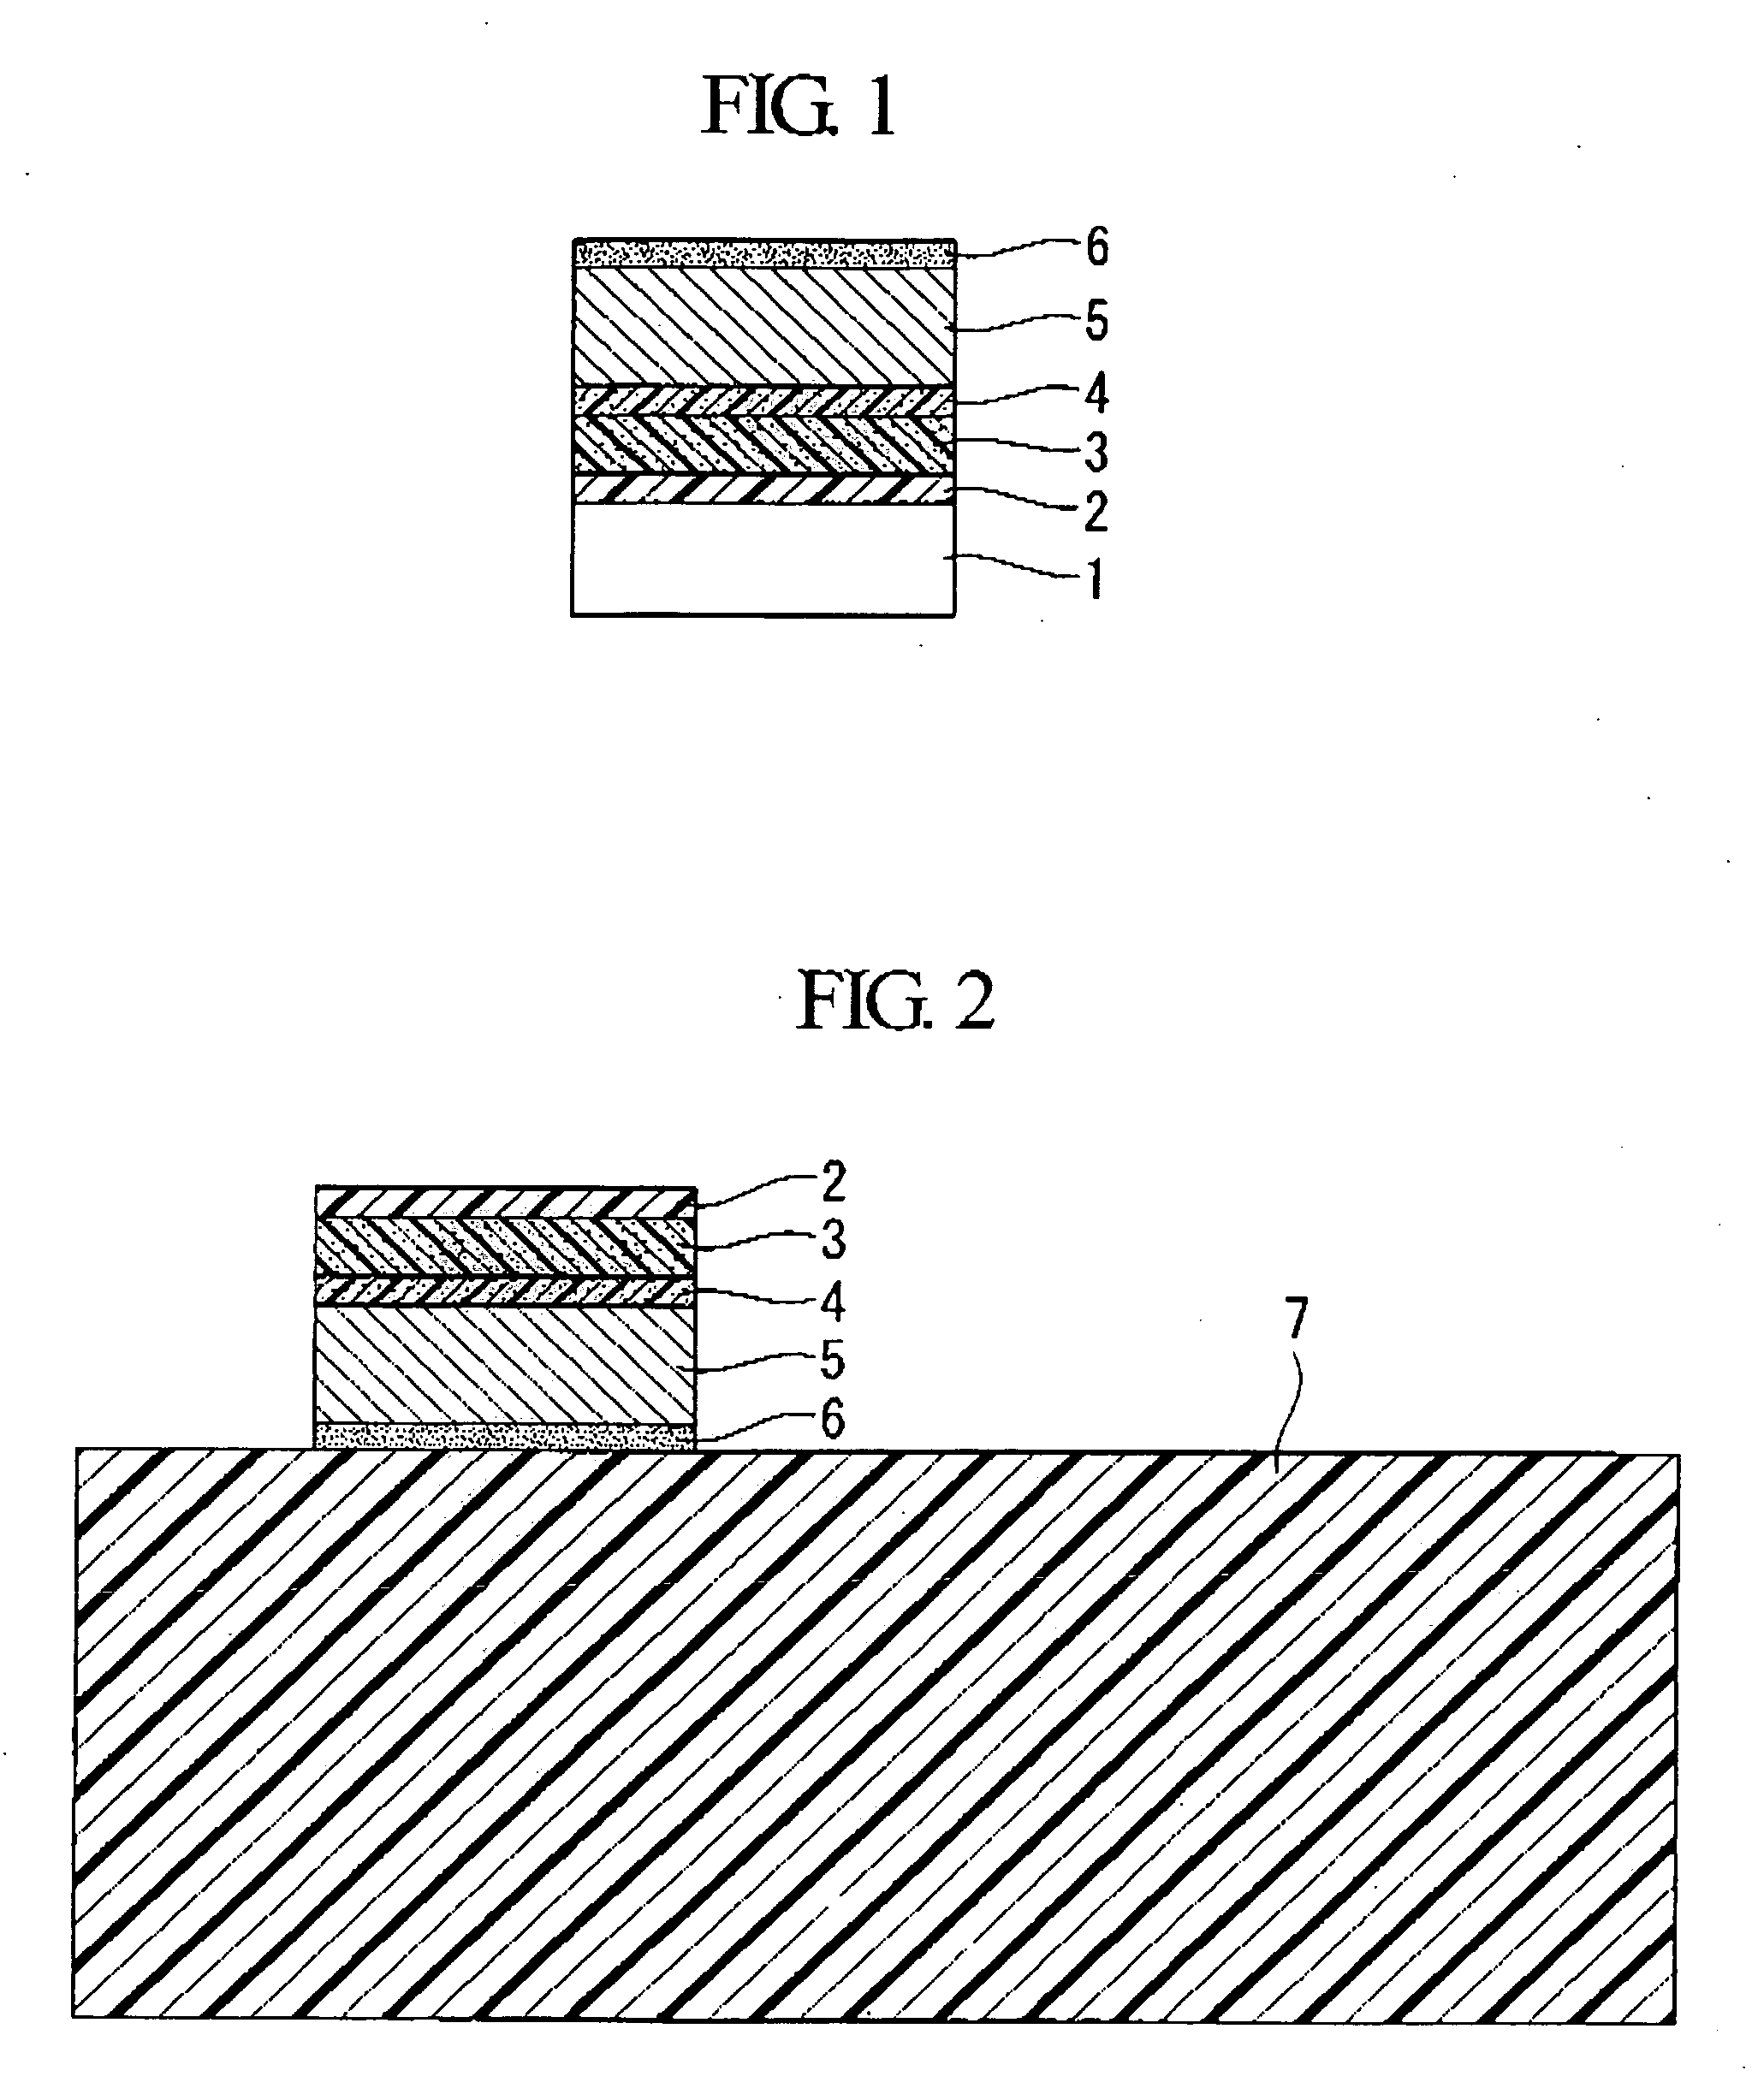 Magnetic Recording Medium and Manufacturing Method Therefor